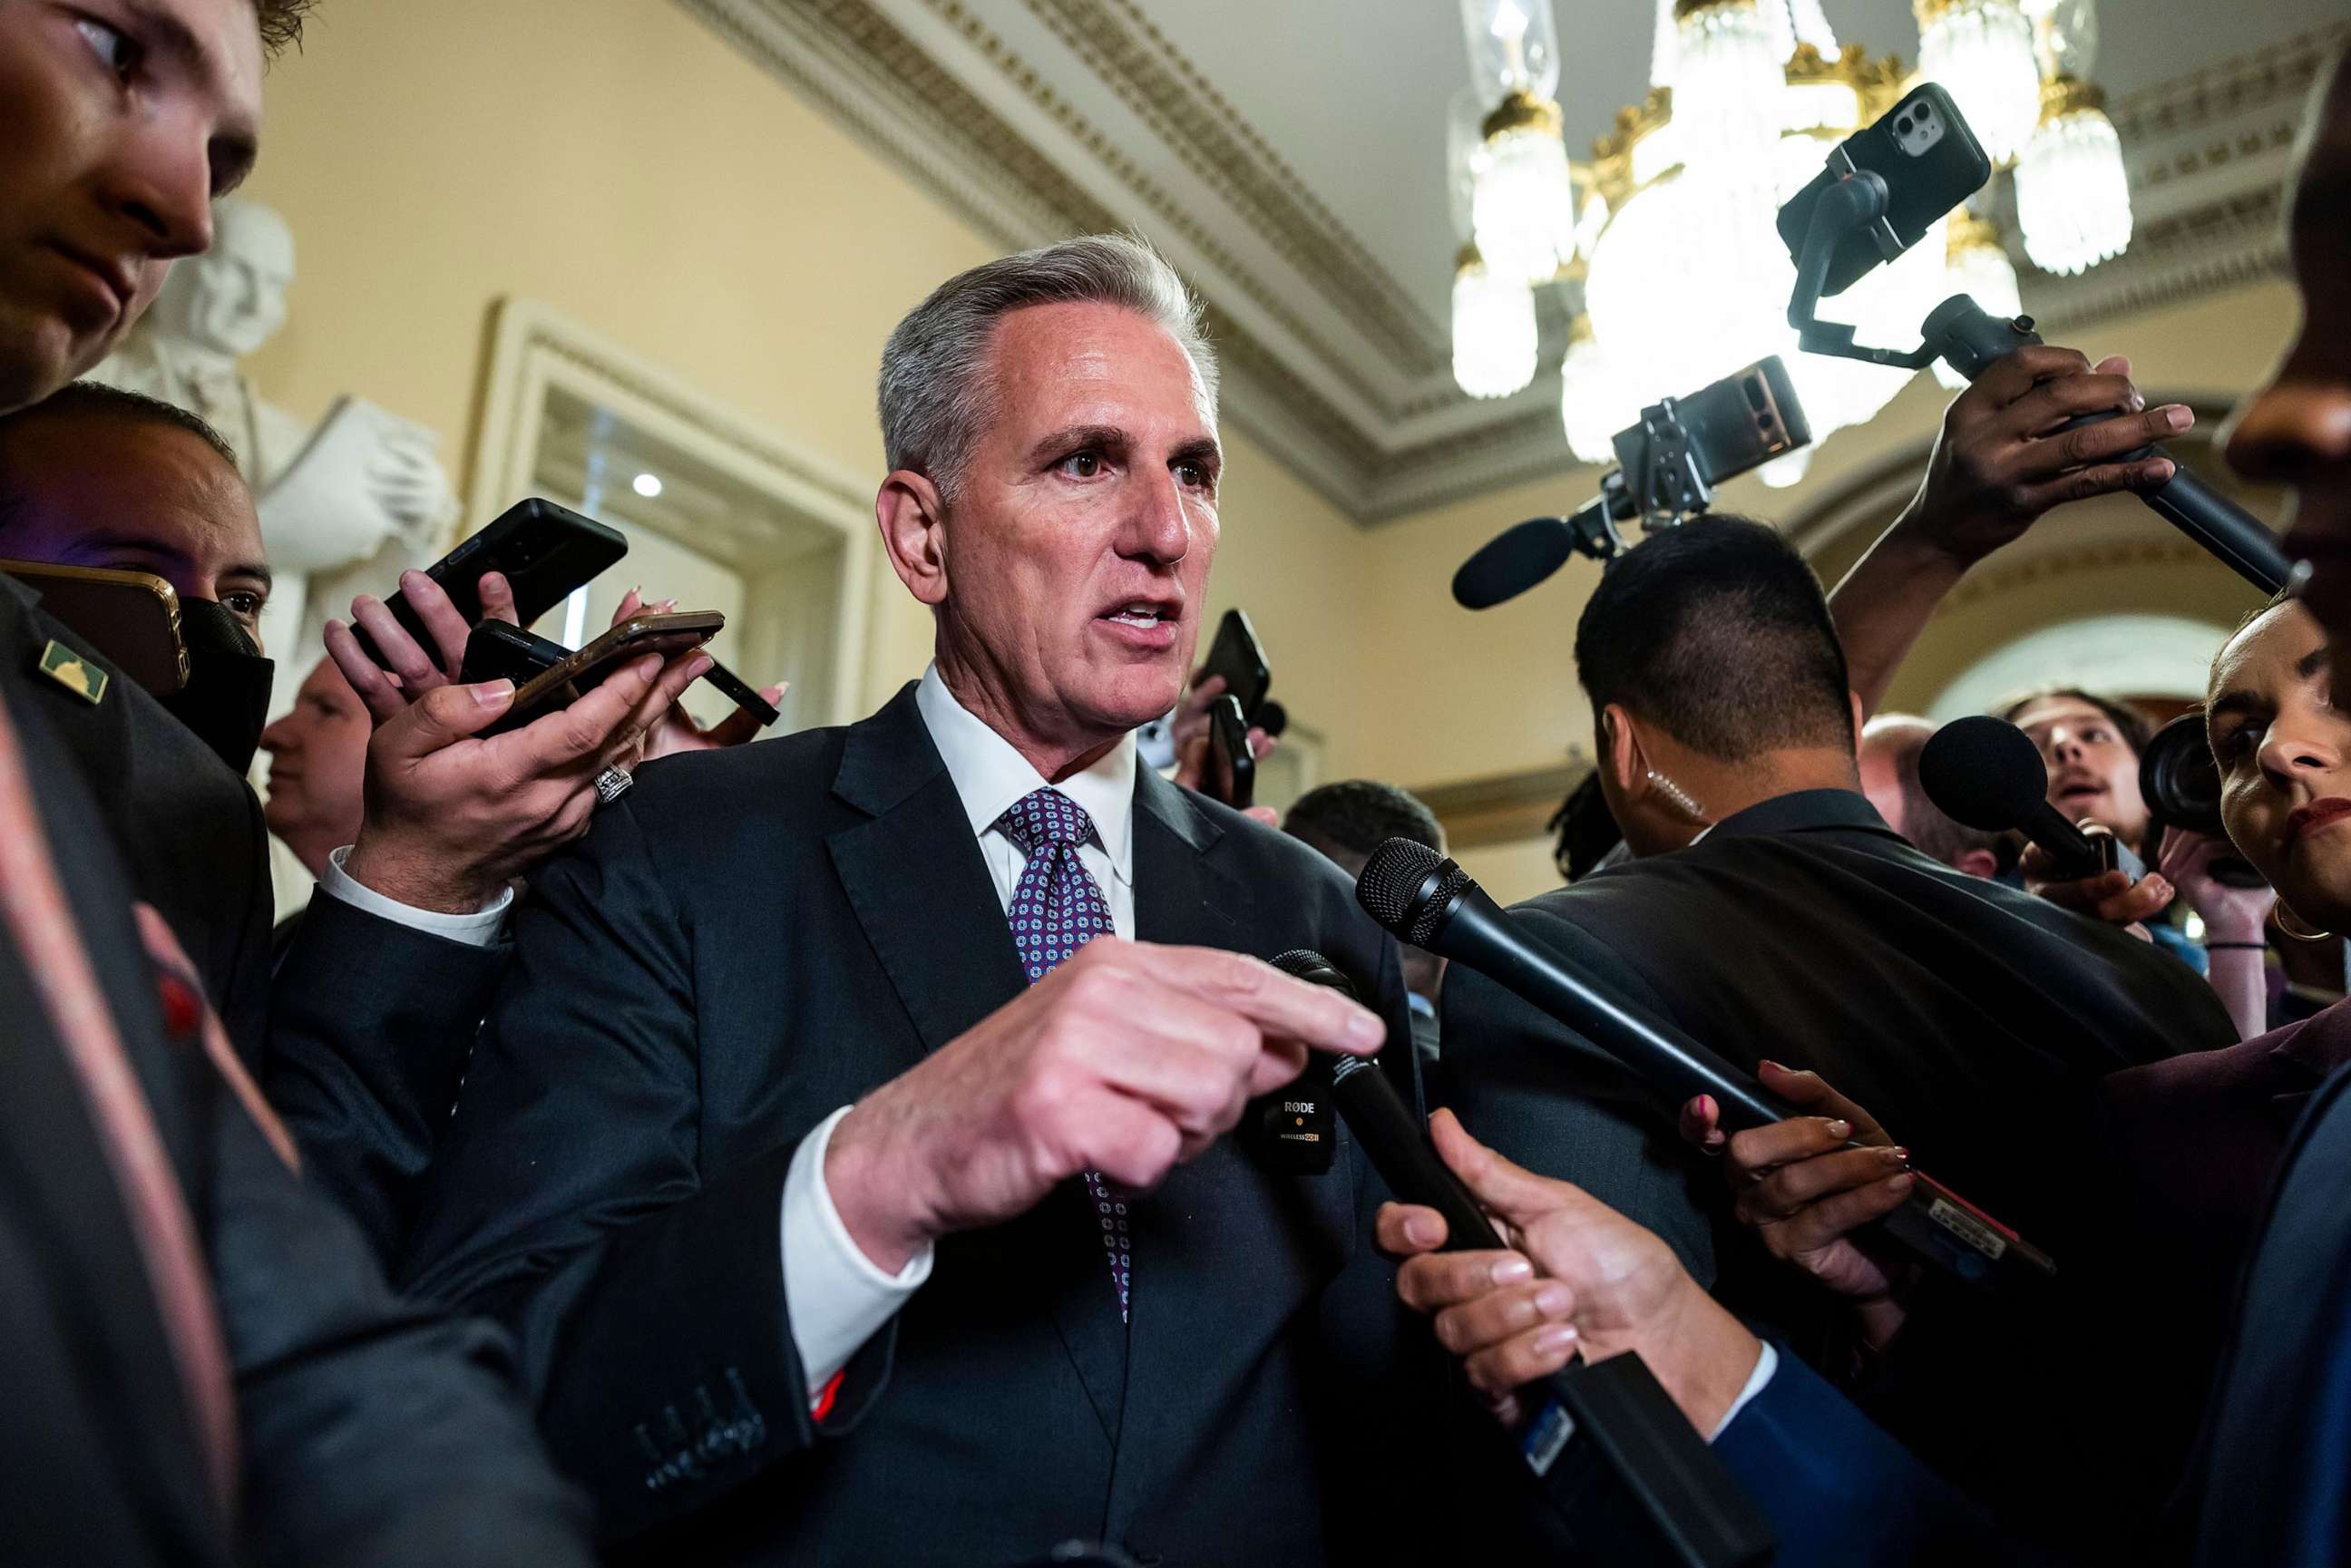 PHOTO: Speaker of the House Kevin McCarthy speaks briefly to the media on the day the House plans to vote on the tentative agreement between the White House and Congress to raise the debt limit in the US Capitol in Washington, D.C., on May 31, 2023.